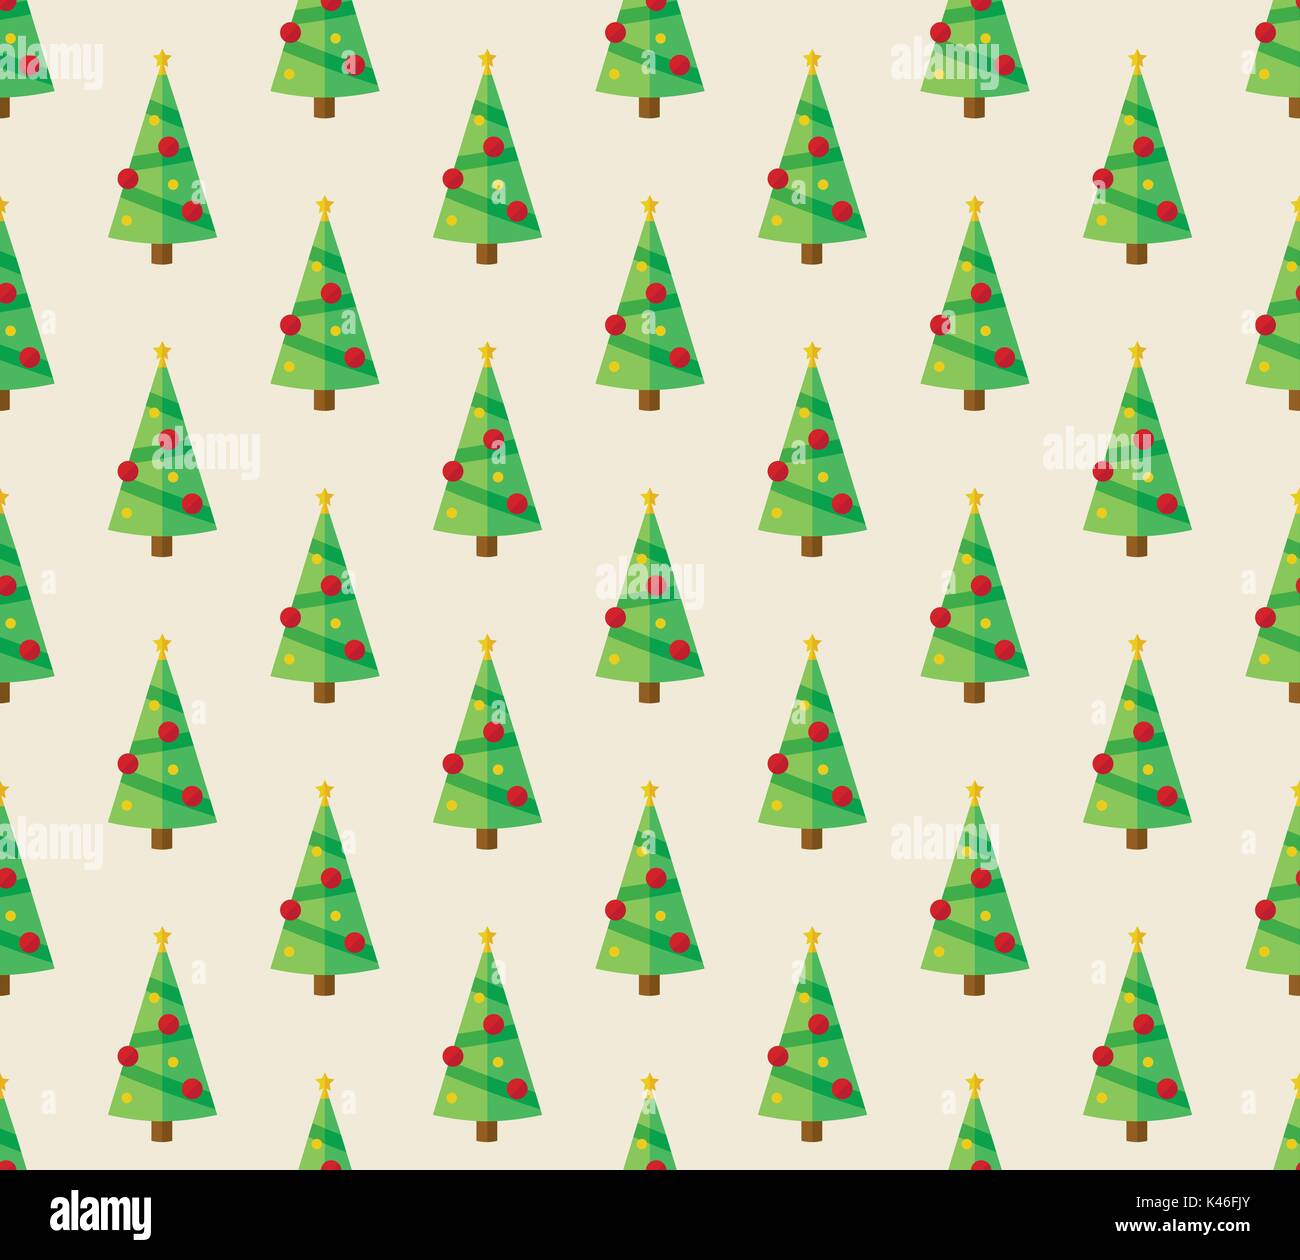 Seamless pattern with flat design christmas tree repetition Stock Vector